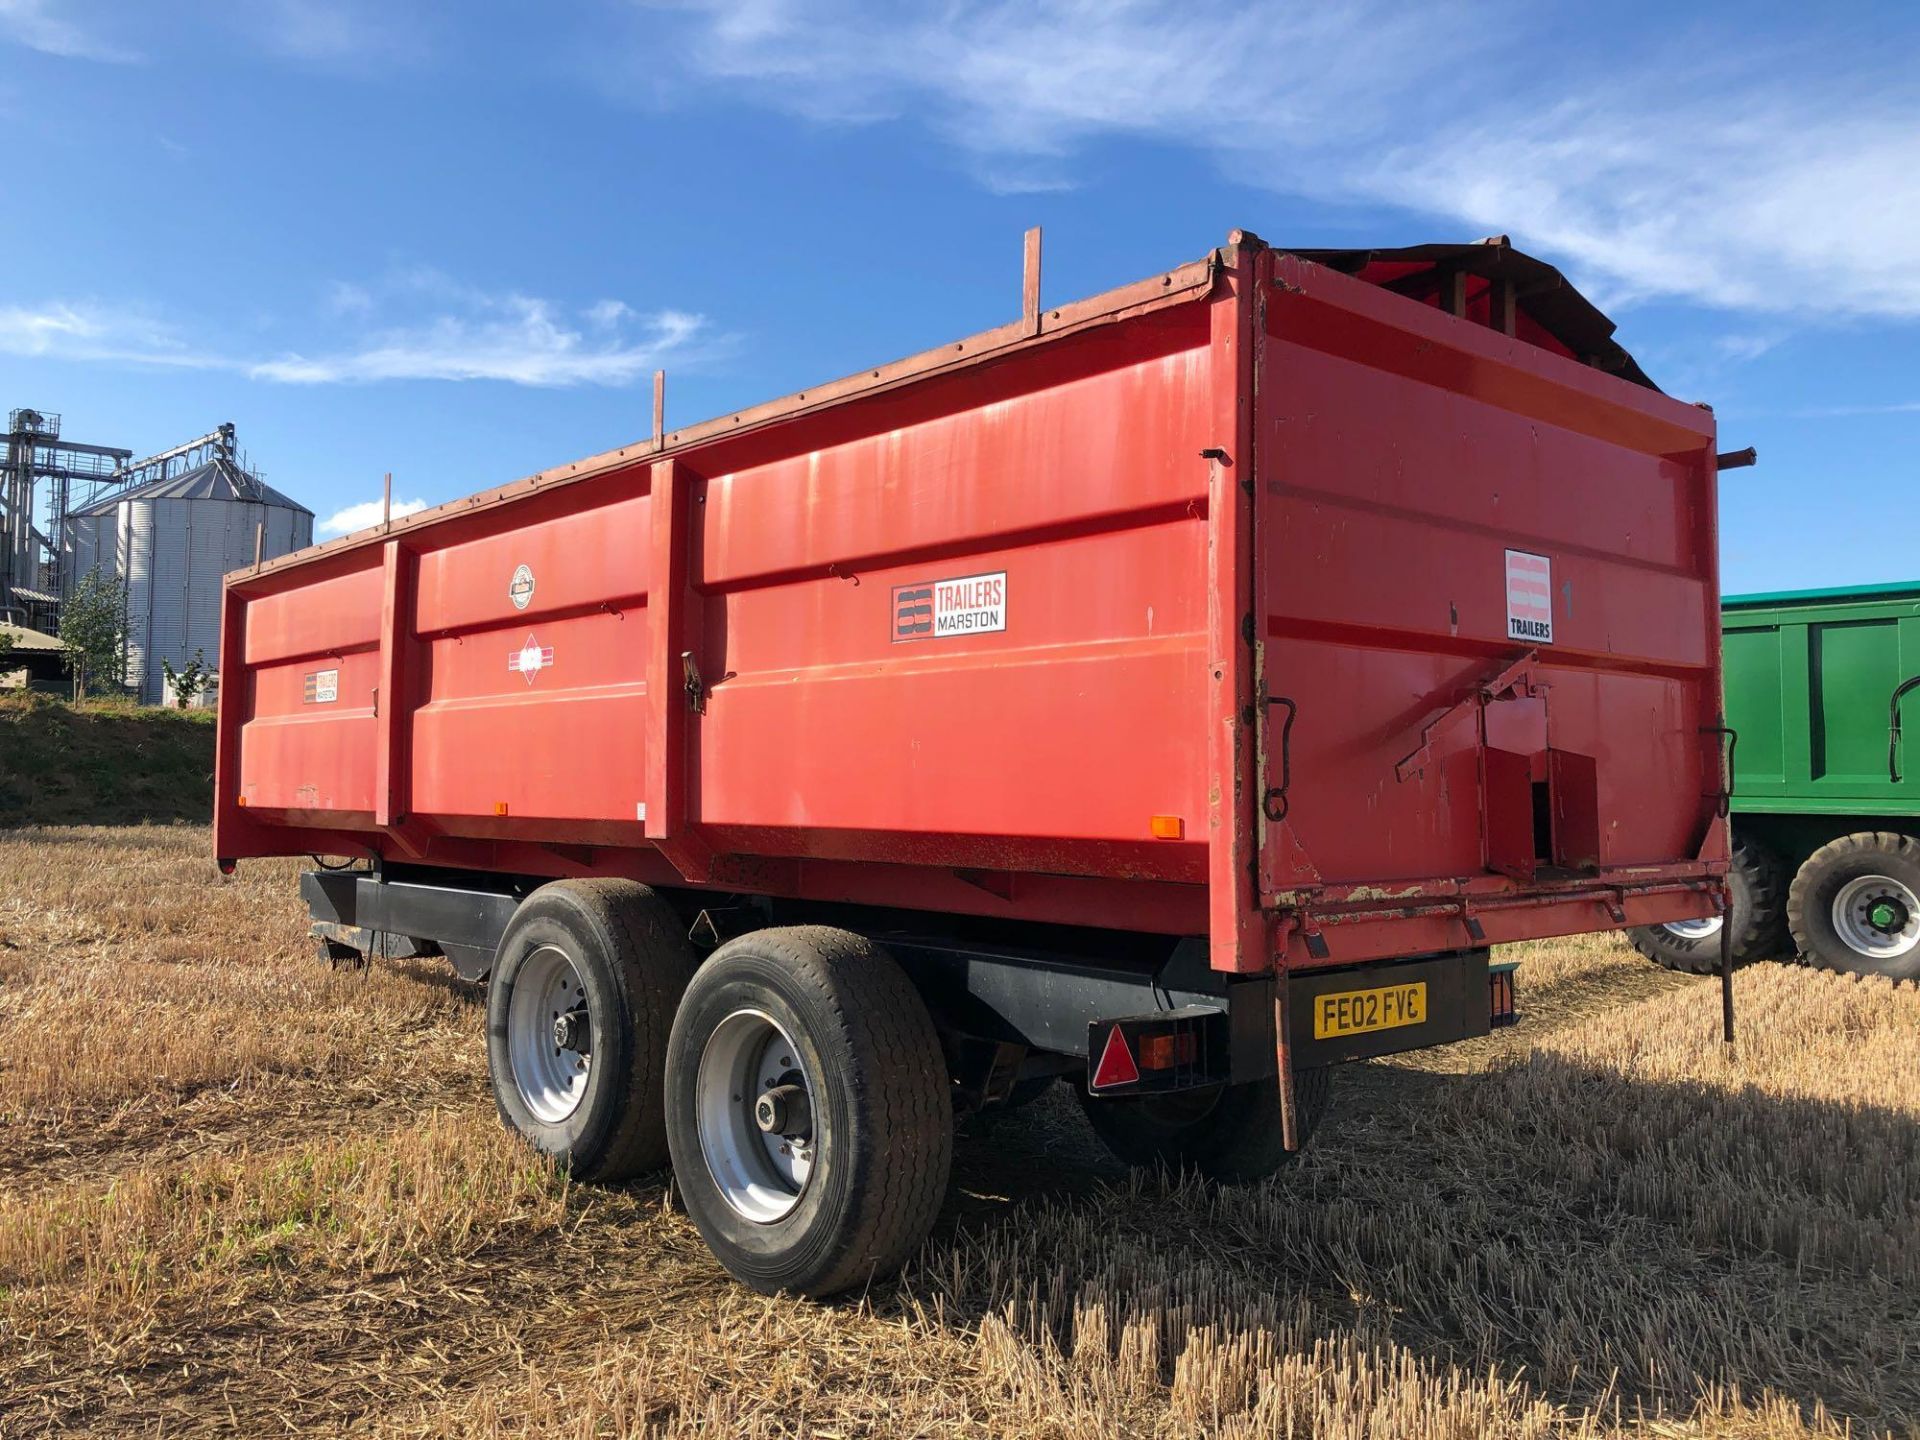 1995 AS Marston ACE FF14T twin axle grain trailer with sprung drawbar, manual tailgate and grain chu - Image 6 of 7